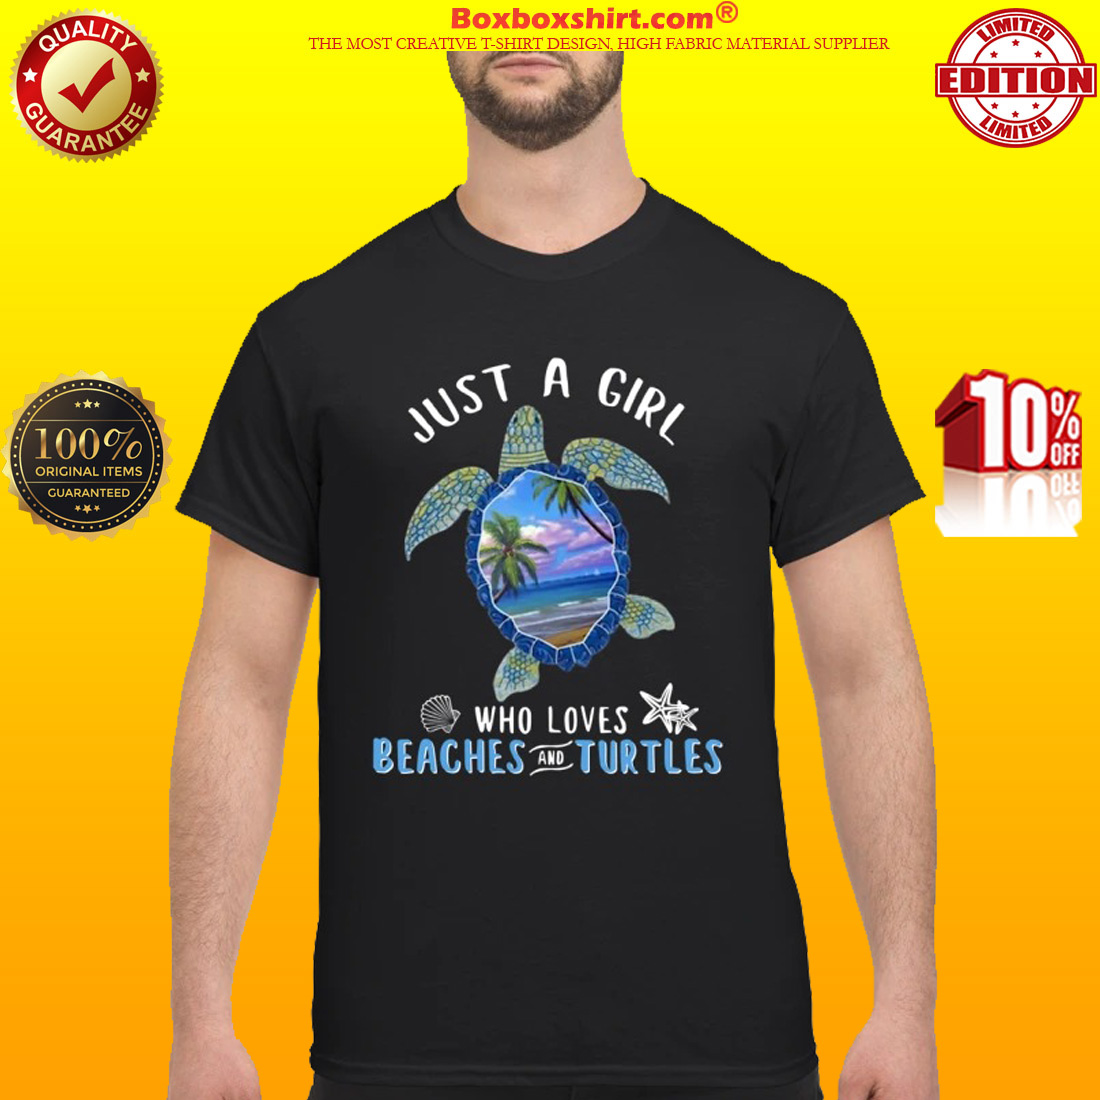 Just a girl who loves beaches and turtles classic shirt